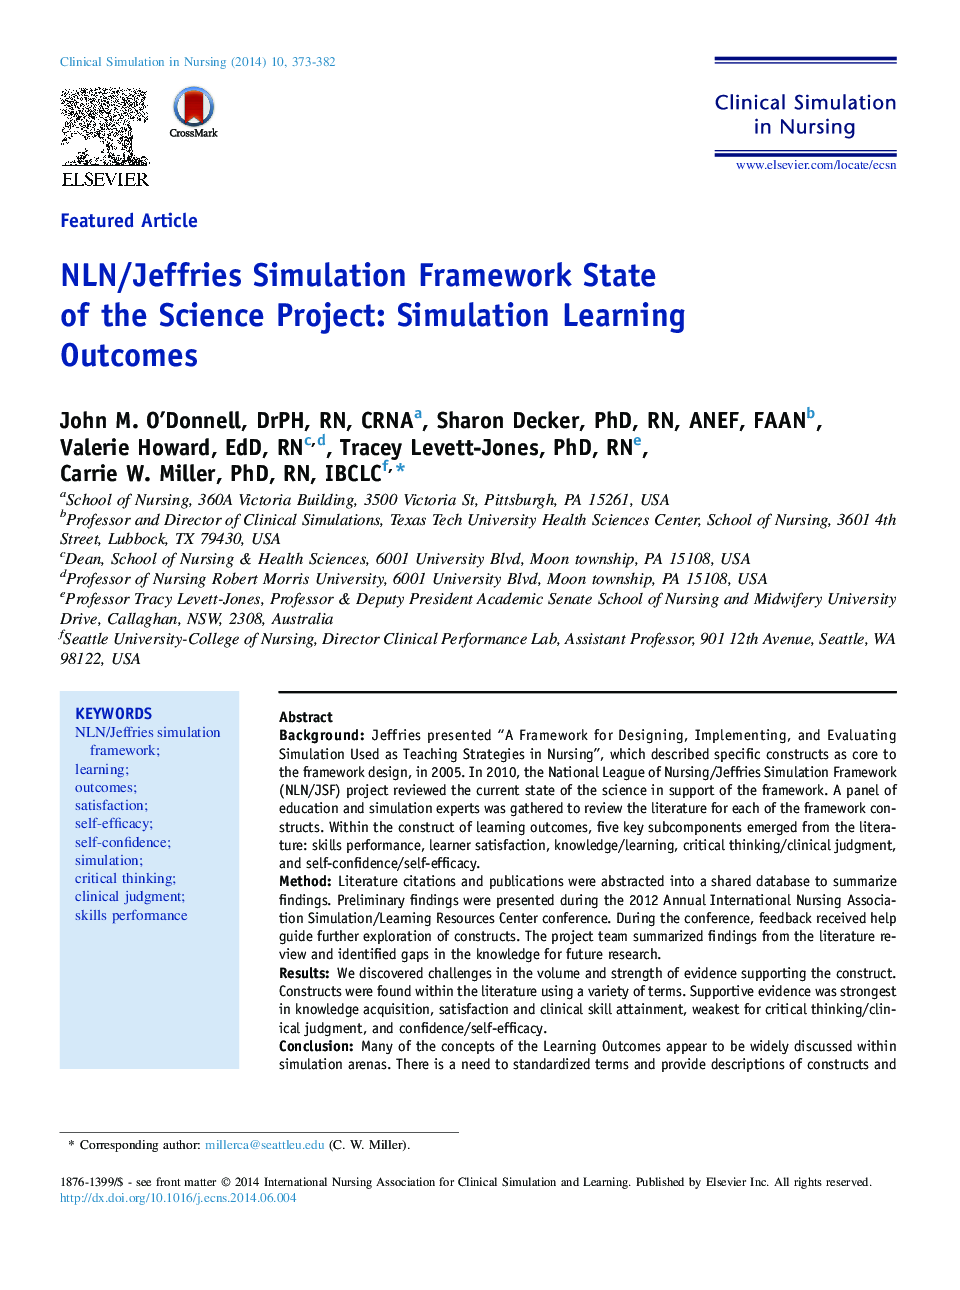 NLN/Jeffries Simulation Framework State of the Science Project: Simulation Learning Outcomes